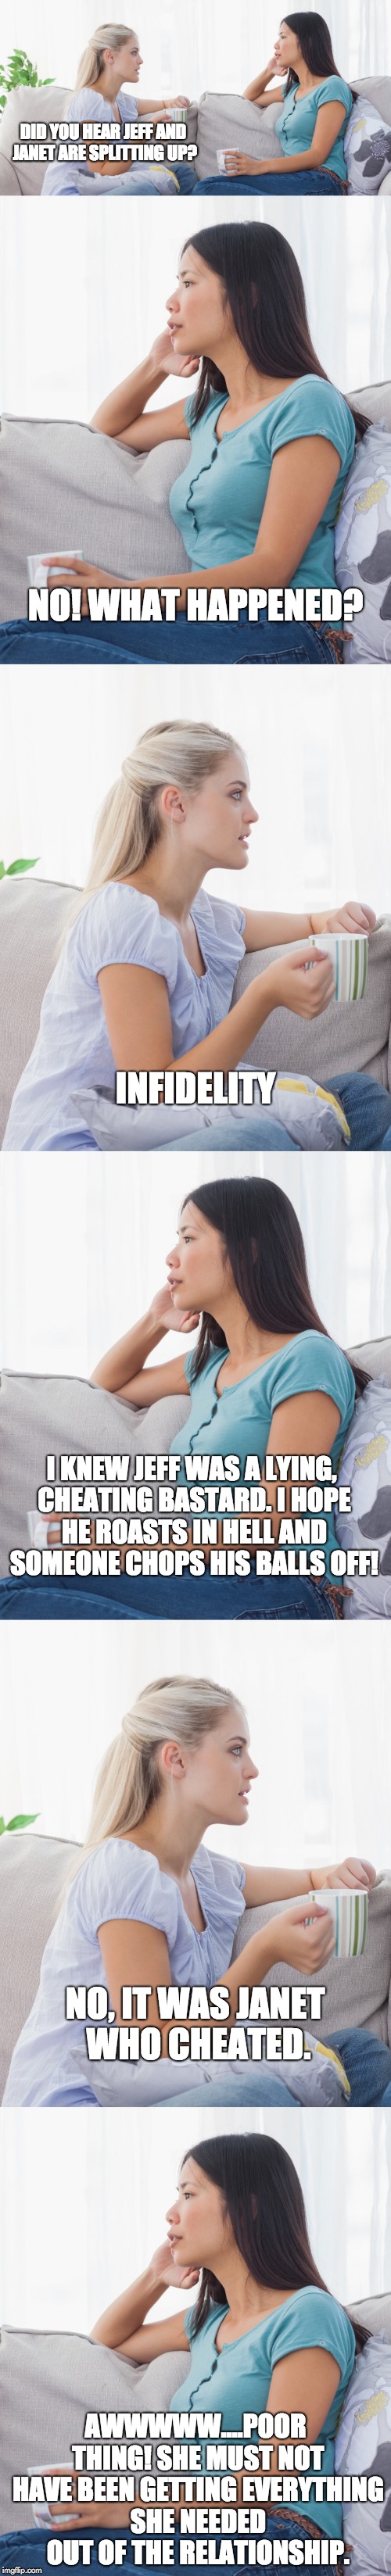 Women, in a nutshell | DID YOU HEAR JEFF AND JANET ARE SPLITTING UP? NO! WHAT HAPPENED? INFIDELITY; I KNEW JEFF WAS A LYING, CHEATING BASTARD. I HOPE HE ROASTS IN HELL AND SOMEONE CHOPS HIS BALLS OFF! NO, IT WAS JANET WHO CHEATED. AWWWWW....POOR THING! SHE MUST NOT HAVE BEEN GETTING EVERYTHING SHE NEEDED OUT OF THE RELATIONSHIP. | image tagged in women | made w/ Imgflip meme maker